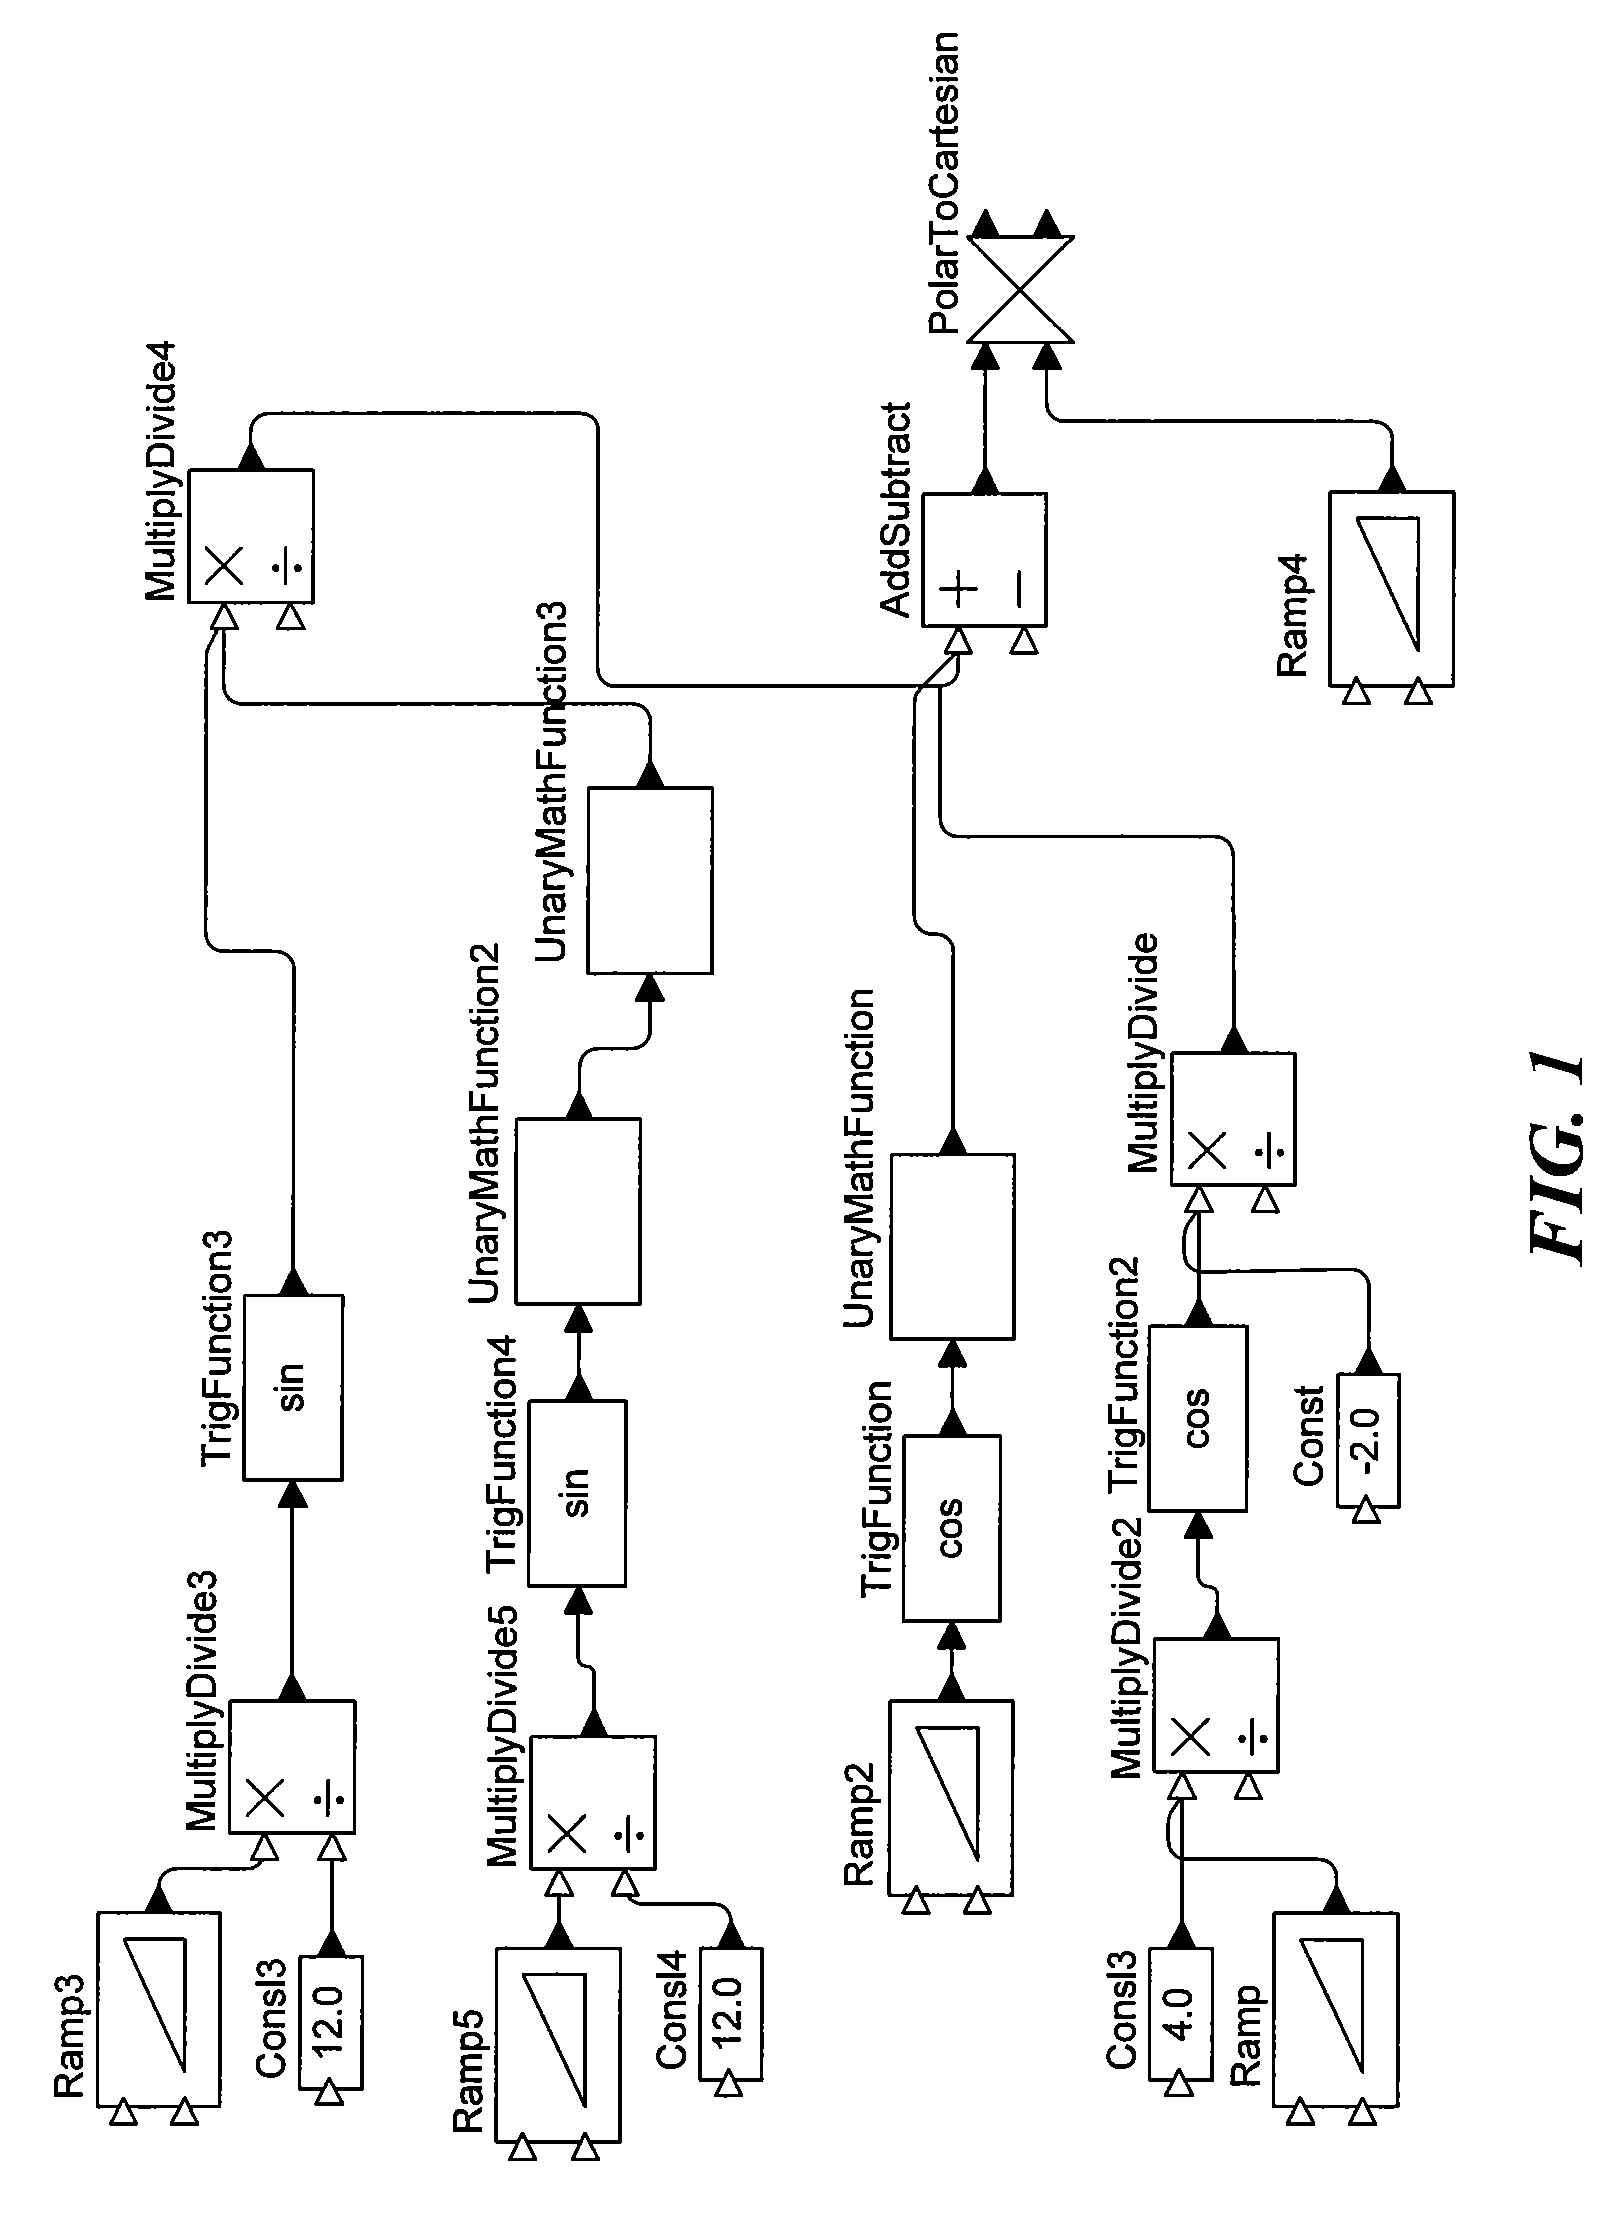 System and method for architecture-adaptable automatic parallelization of computing code